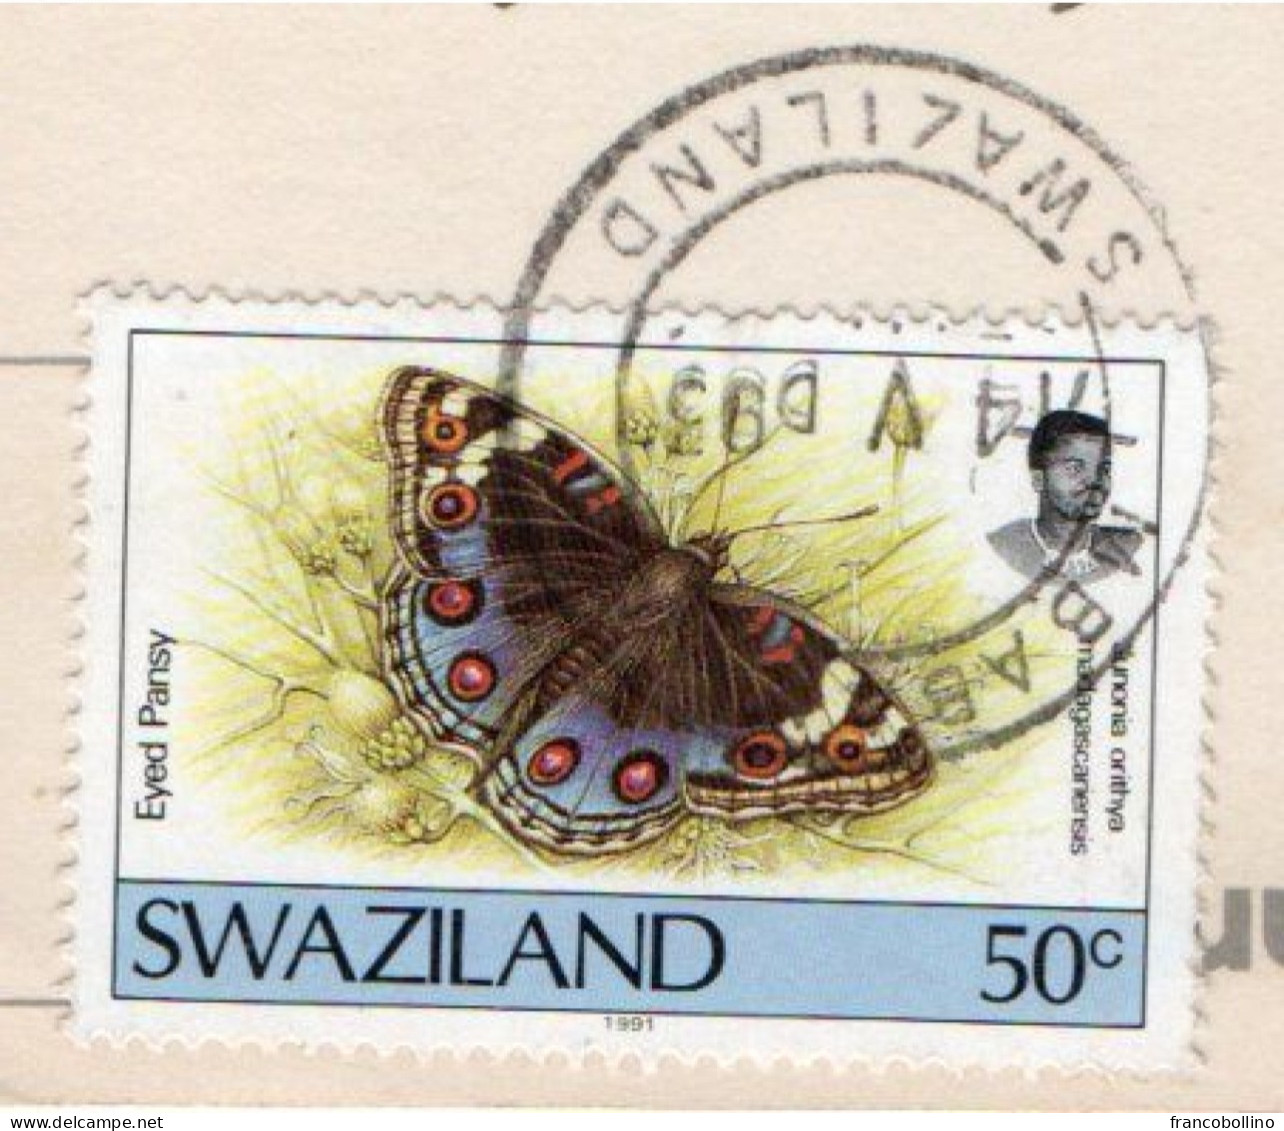 SWAZILAND - FLOWERS / THEMATIC STAMP-BUTTERFLY - Swasiland